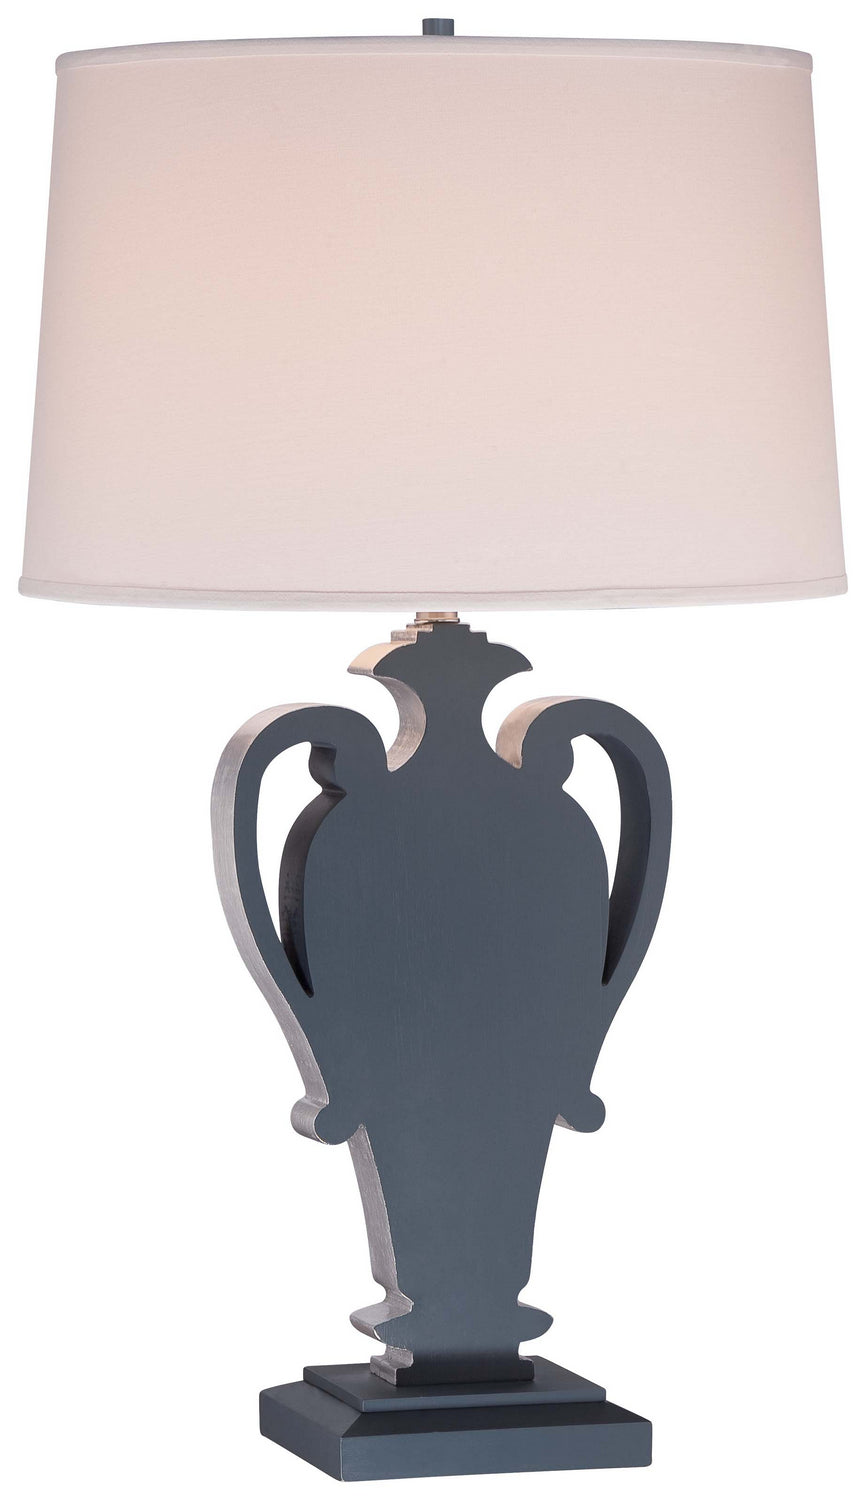 1-Light Table Lamp in Ocean Blue with Silver Leaf Highlights with White Linen Fabric Shade